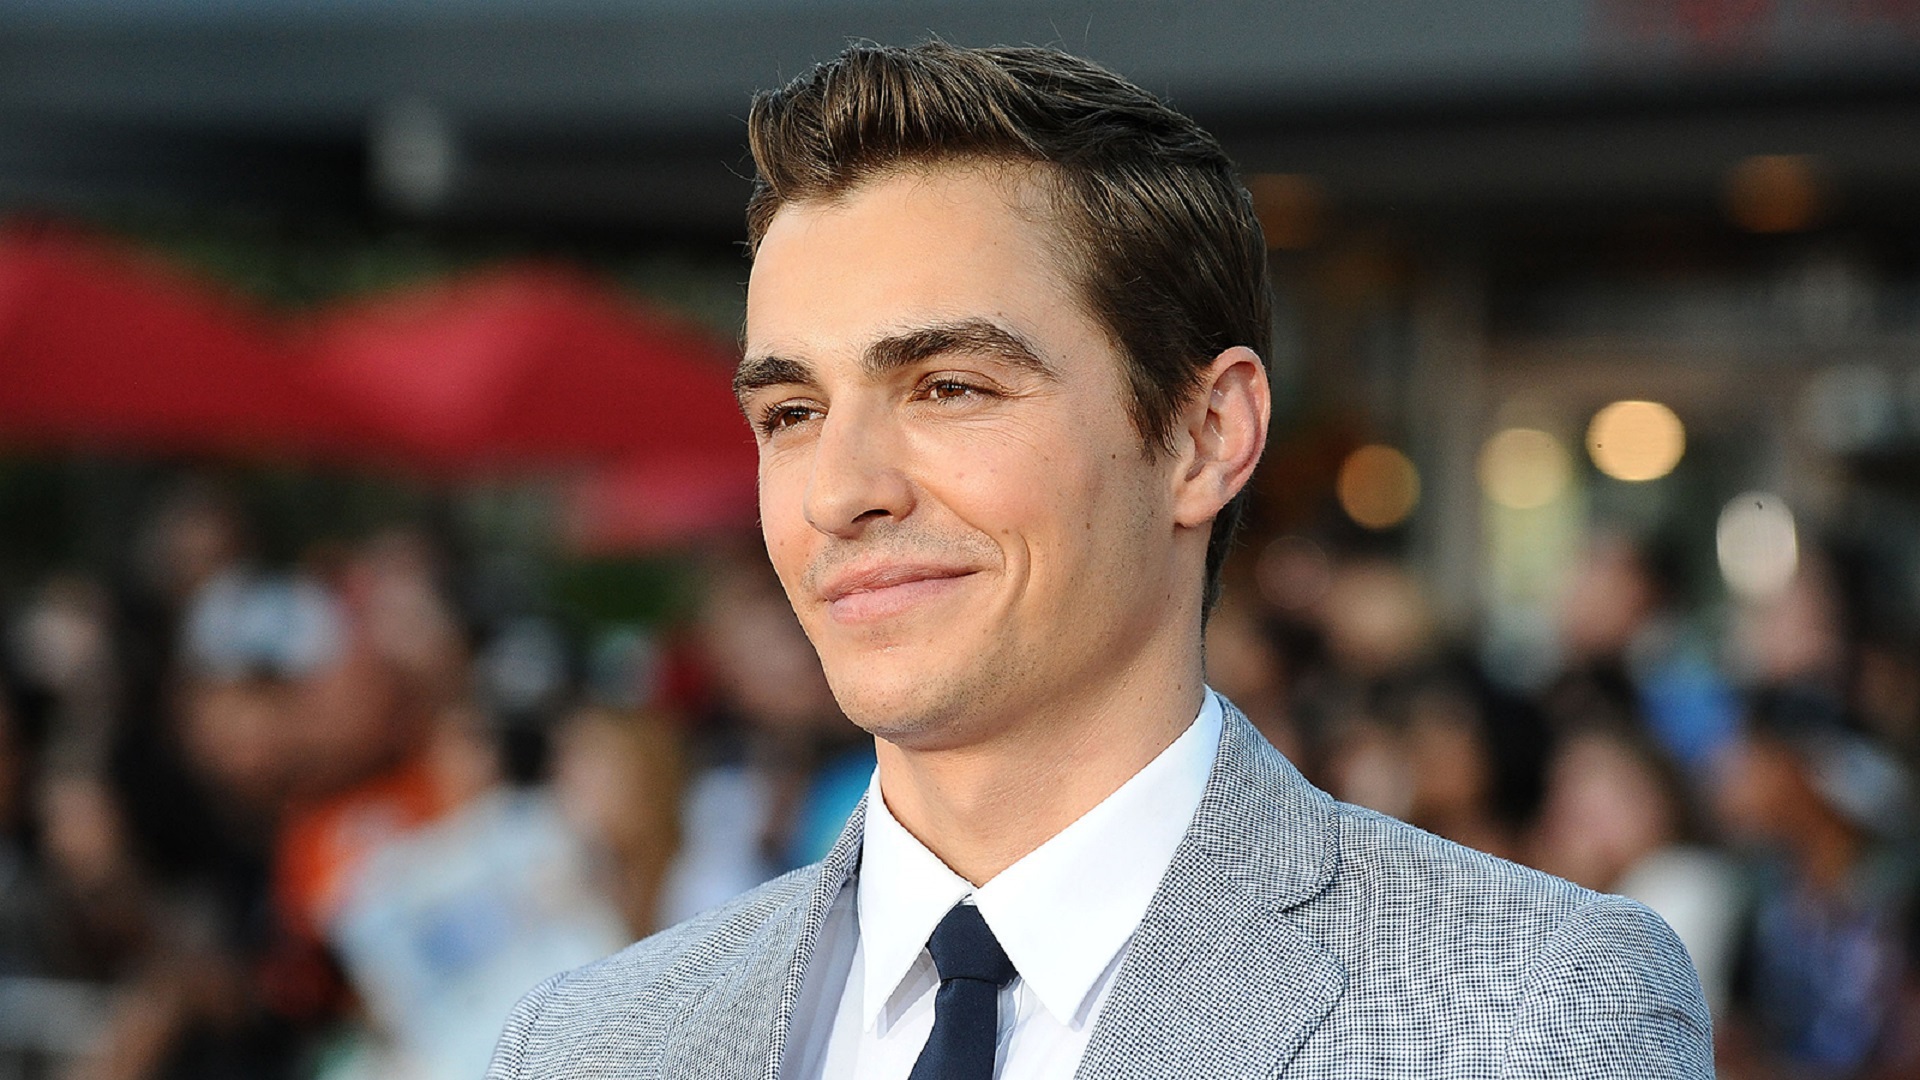 Dave Franco Wallpaper Image Photos Pictures Background